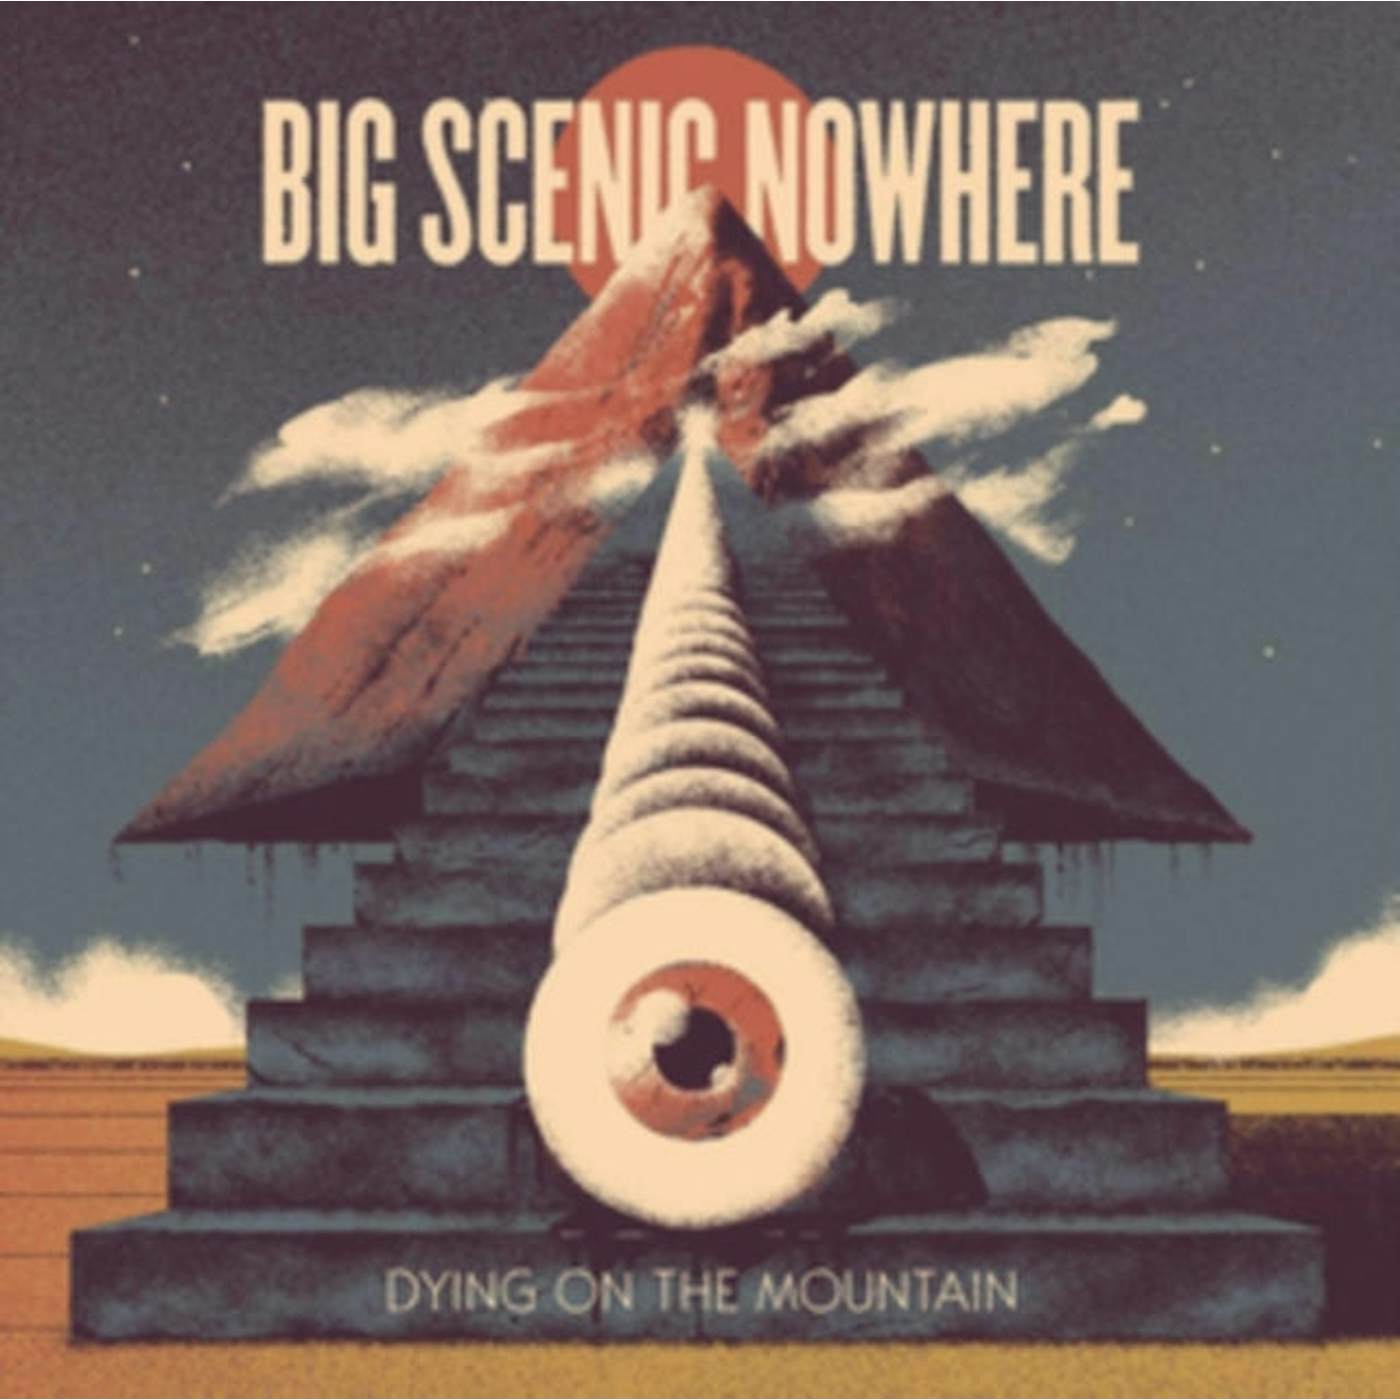 Big Scenic Nowhere CD - Dying On The Mountain